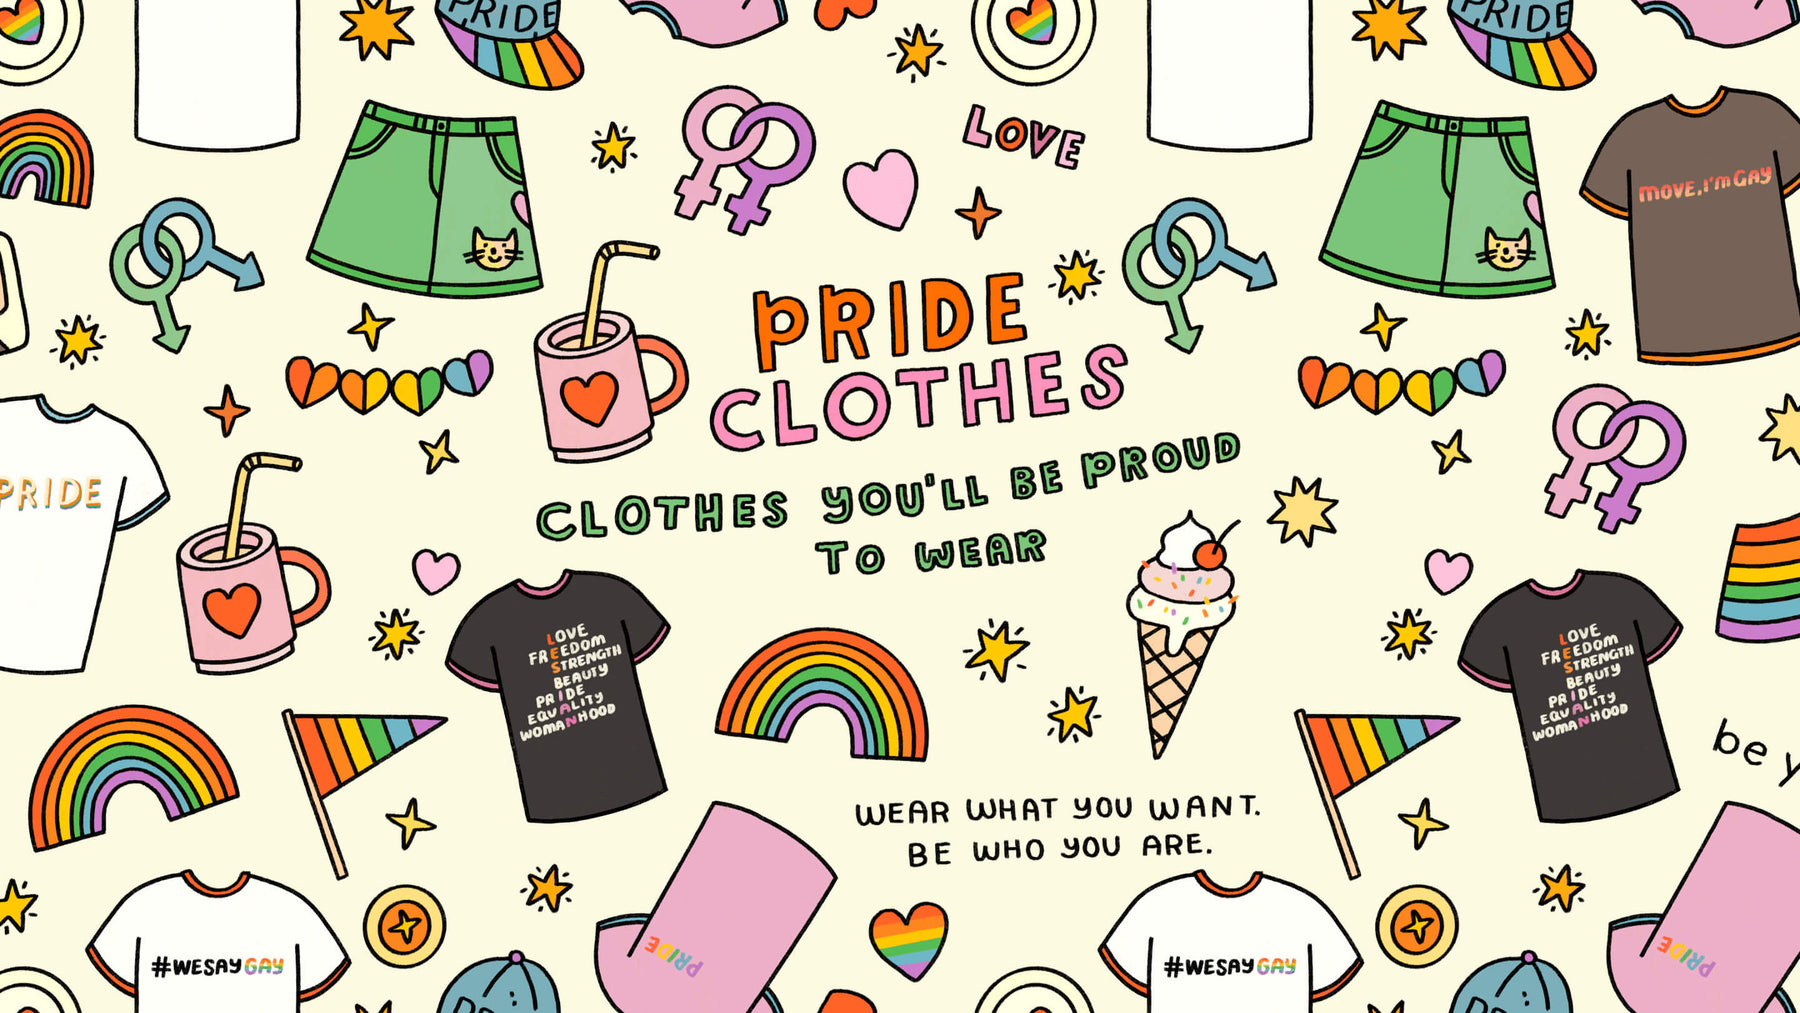 Pride Clothes banner image with shirts and the words clothes you'll be proud to wear